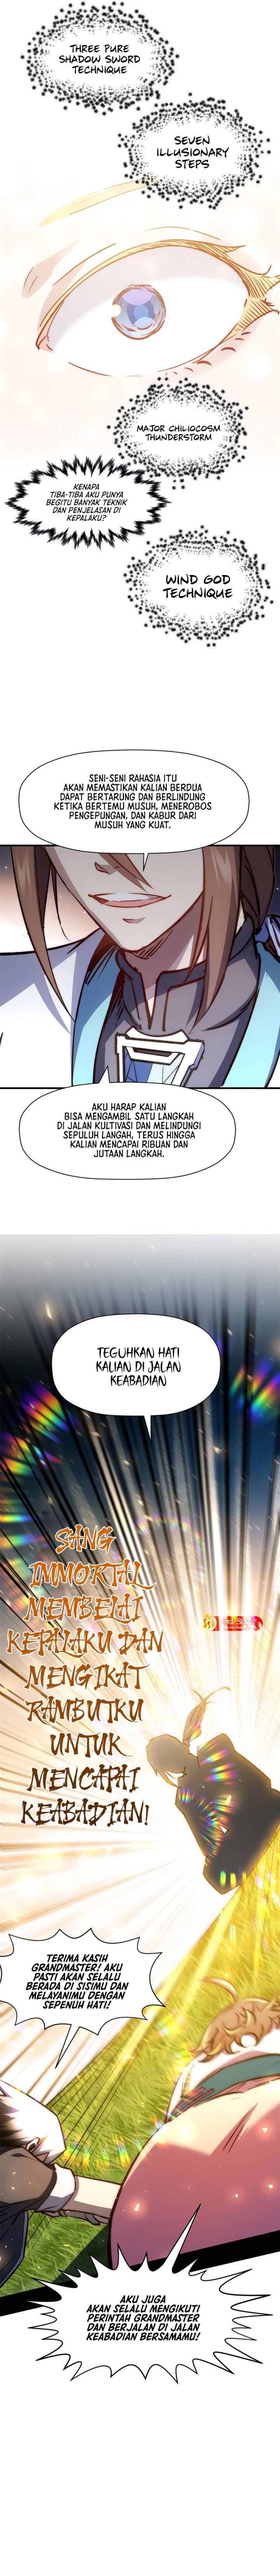 Dilarang COPAS - situs resmi www.mangacanblog.com - Komik top tier providence secretly cultivate for a thousand years 132 - chapter 132 133 Indonesia top tier providence secretly cultivate for a thousand years 132 - chapter 132 Terbaru 14|Baca Manga Komik Indonesia|Mangacan